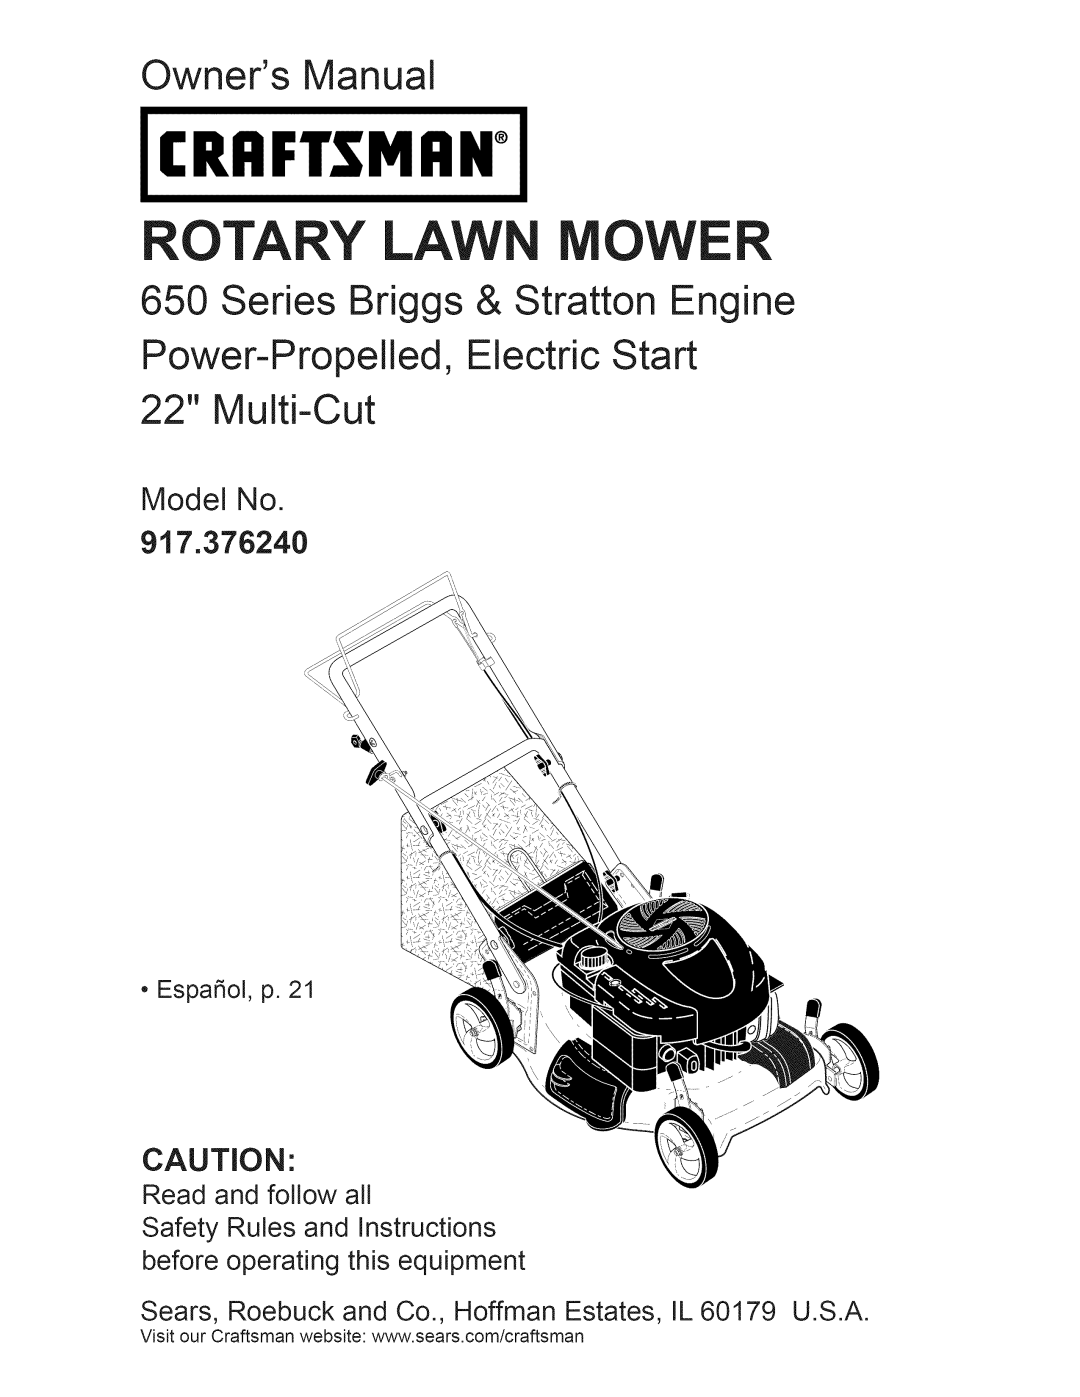 Craftsman manual Model No 917.376240, Craftsman, Rotary Lawn Mower, Owners Manual, Series Briggs & Stratton Engine 